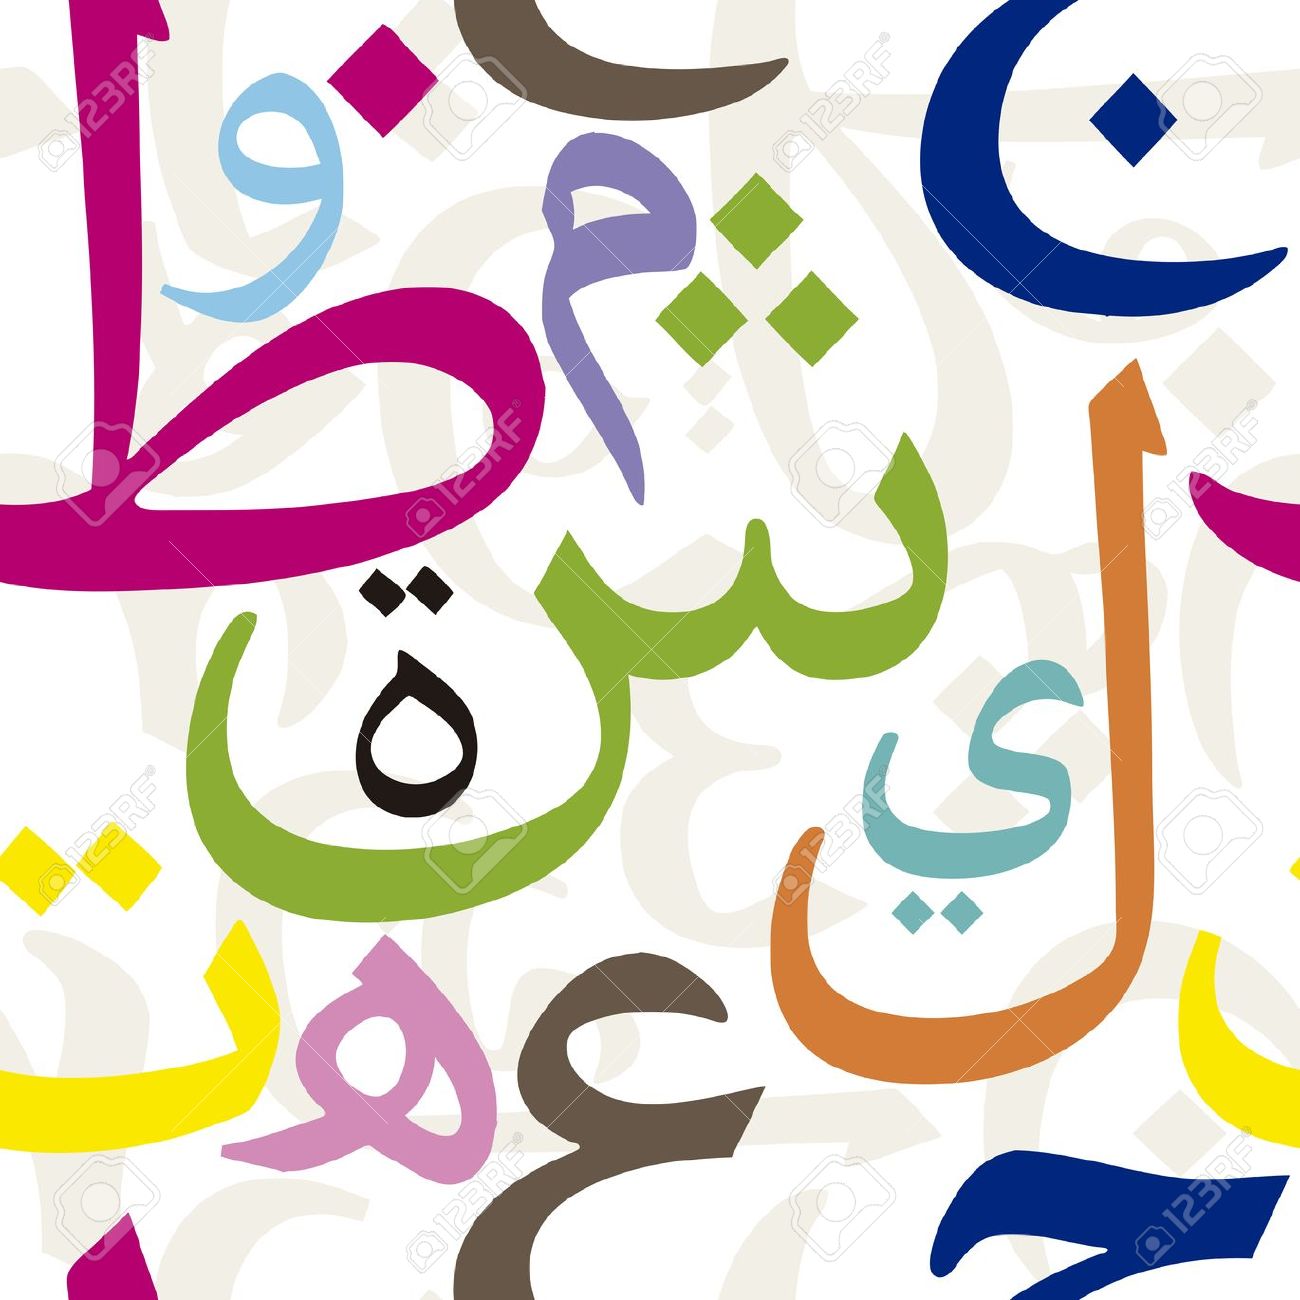 Arabic Alphabet Cliparts - Free Download and Printable